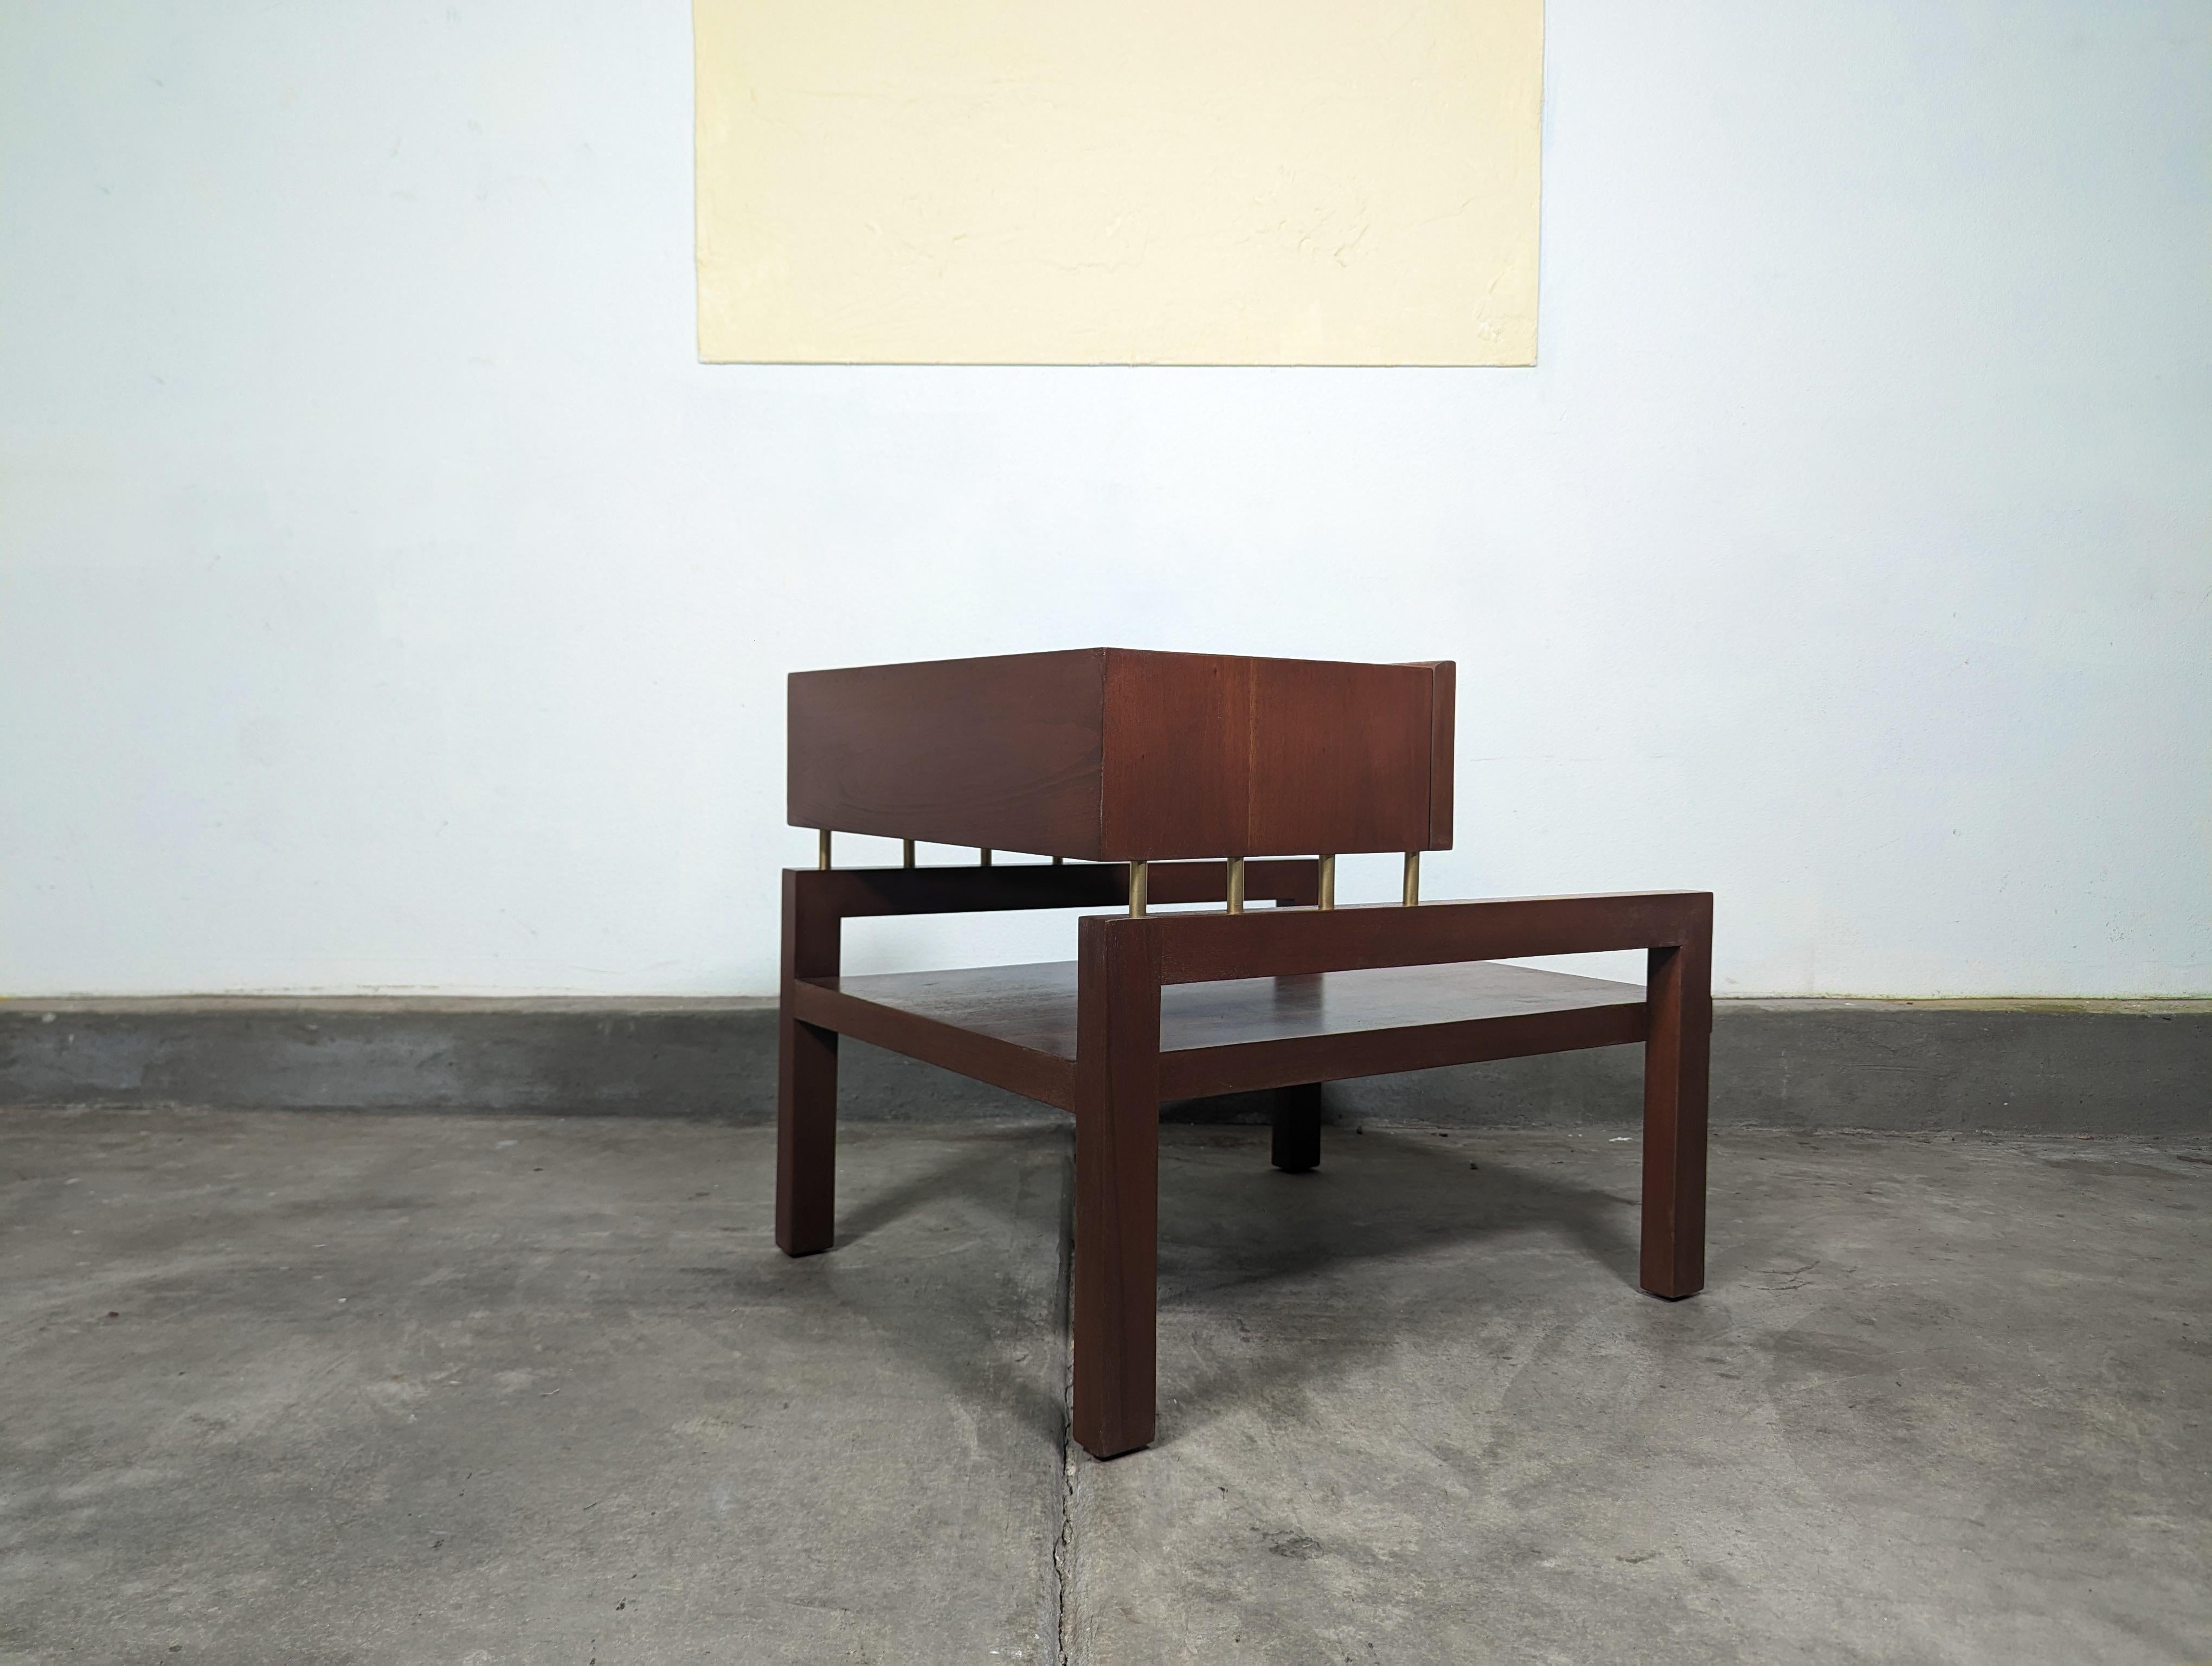 Mahogany Mid Century Modern End Table by Edmond J. Spence for Industria Mueblera, c1950s For Sale